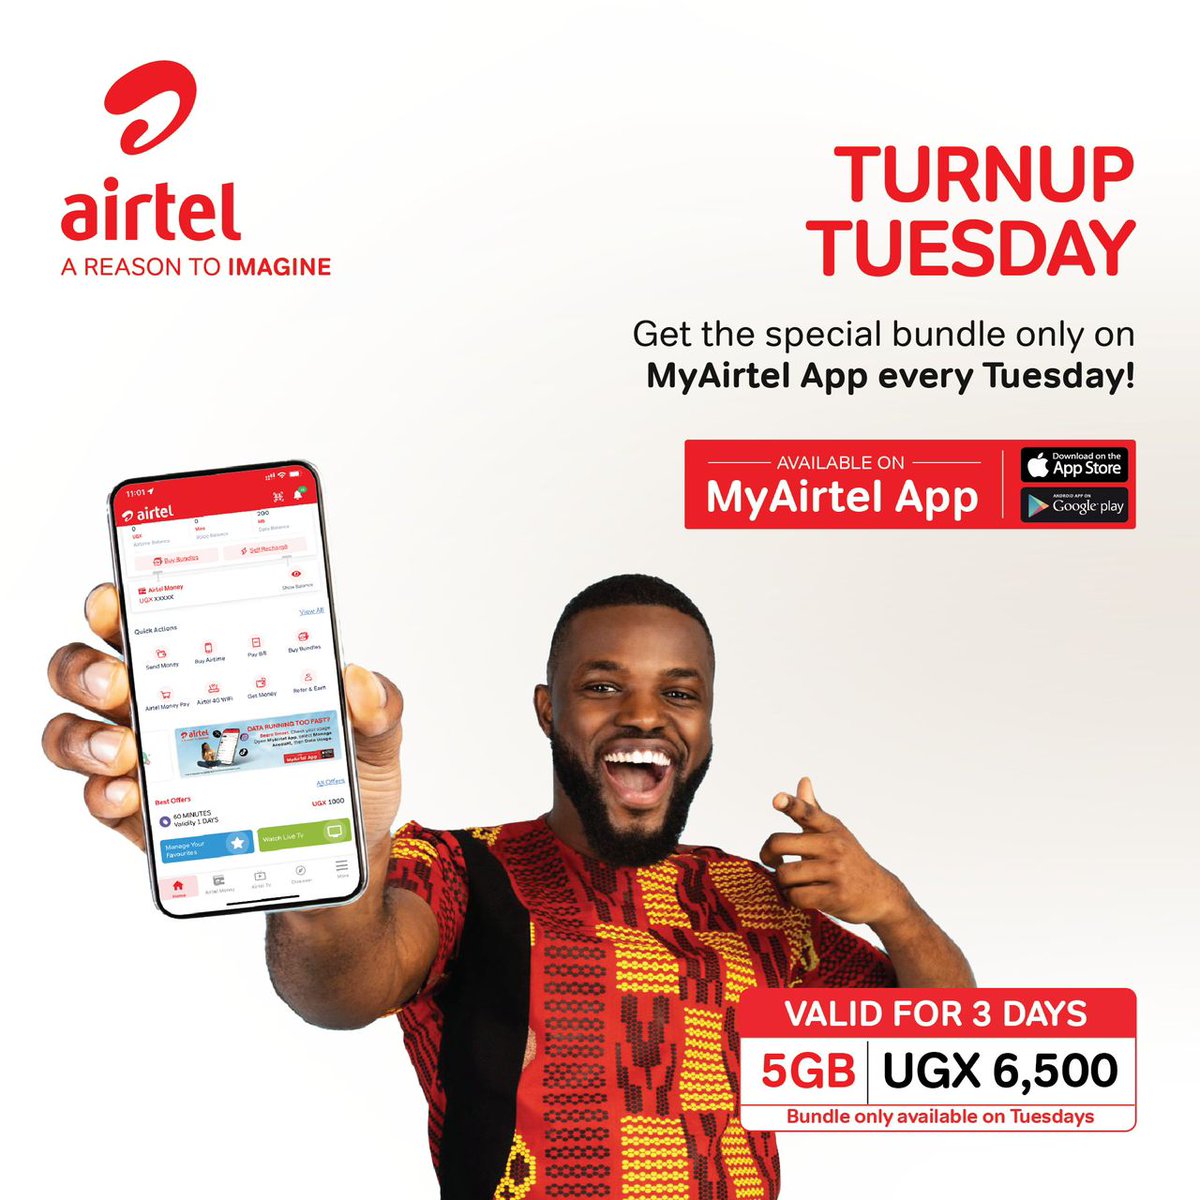 It's a beautiful Tuesday morning and you can get your #TurnUpTuesday bundle at 6,500 only on MyAirtel App, just tap👉 airtelafrica.onelink.me/cGyr/qgj4qeu2 to buy,